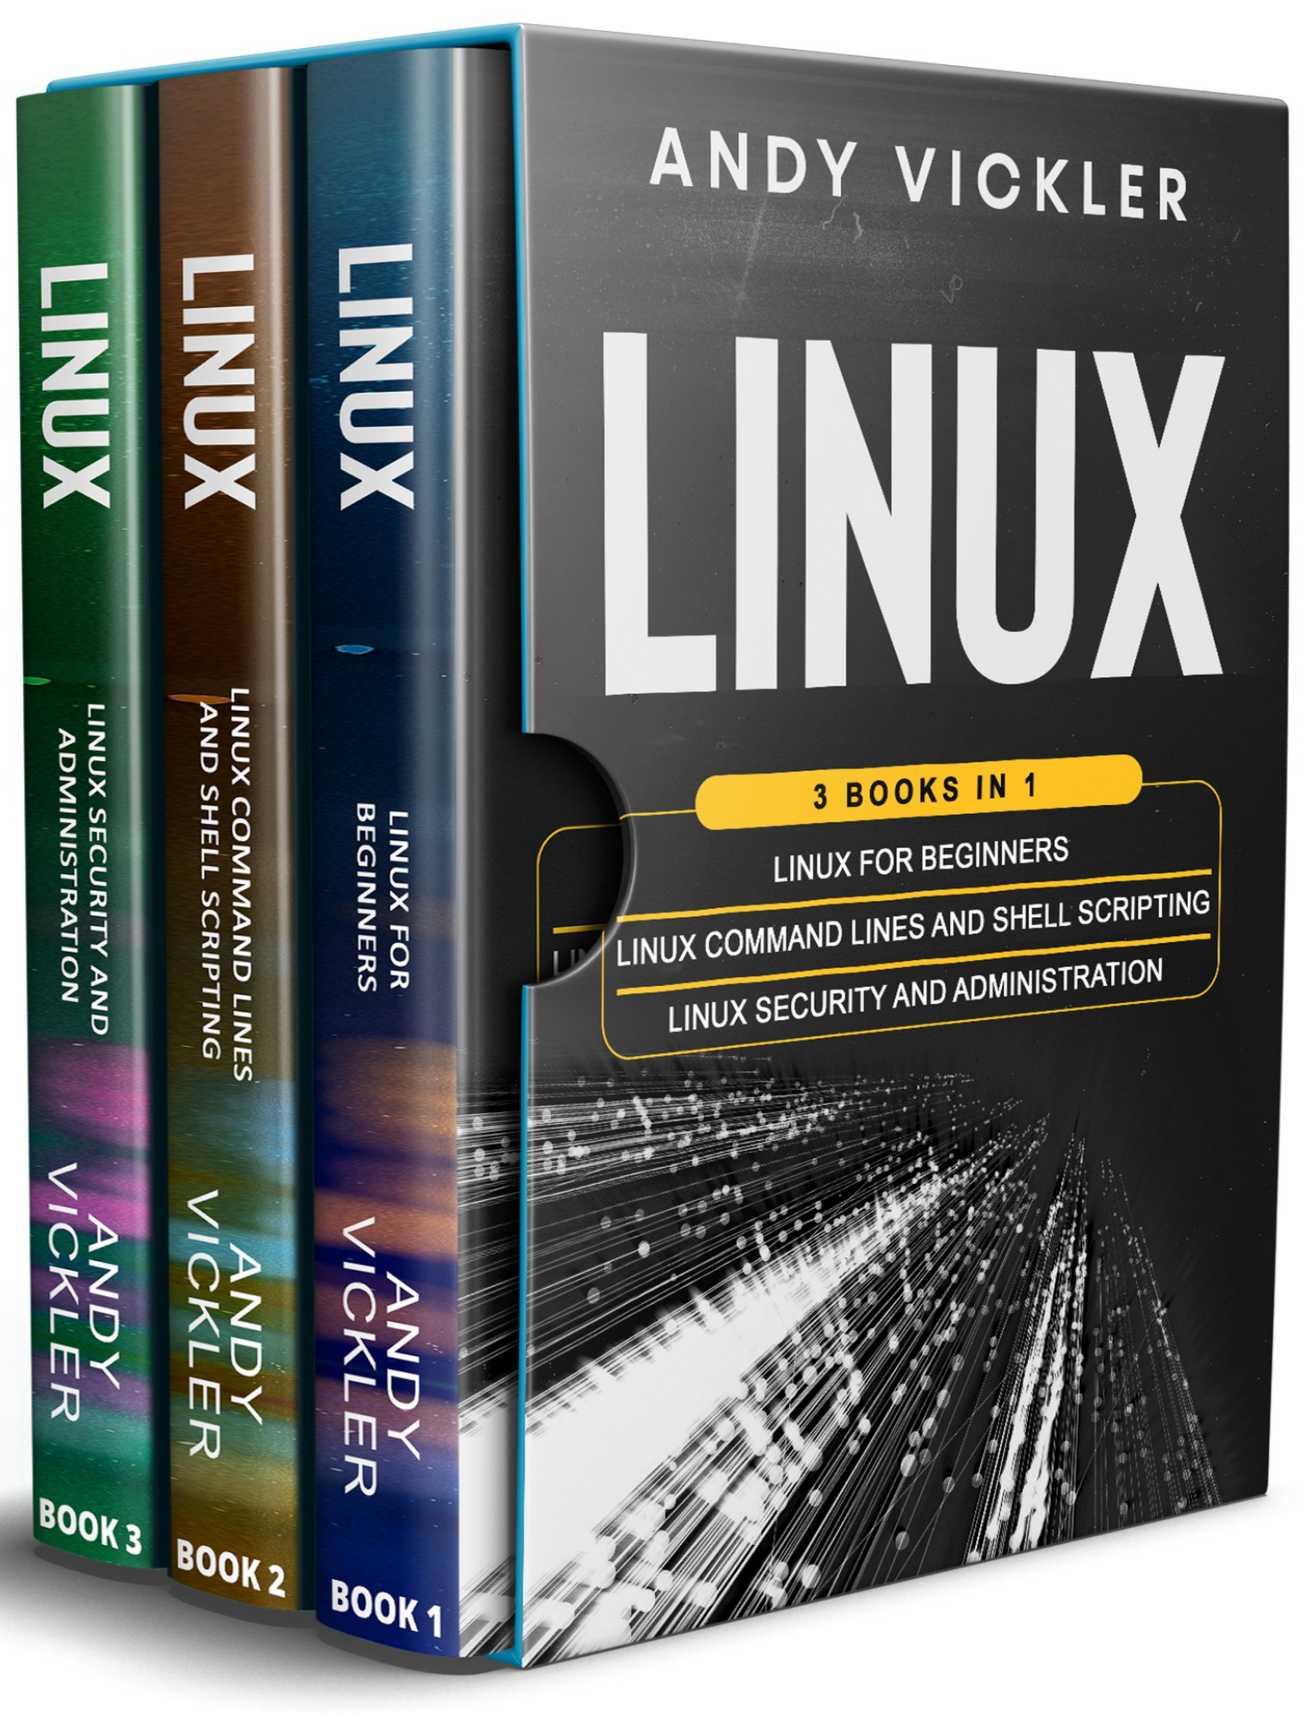 Linux: 3 books in 1: Linux for Beginners + Linux Command Lines and Shell Scripting + Linux Security and Administration